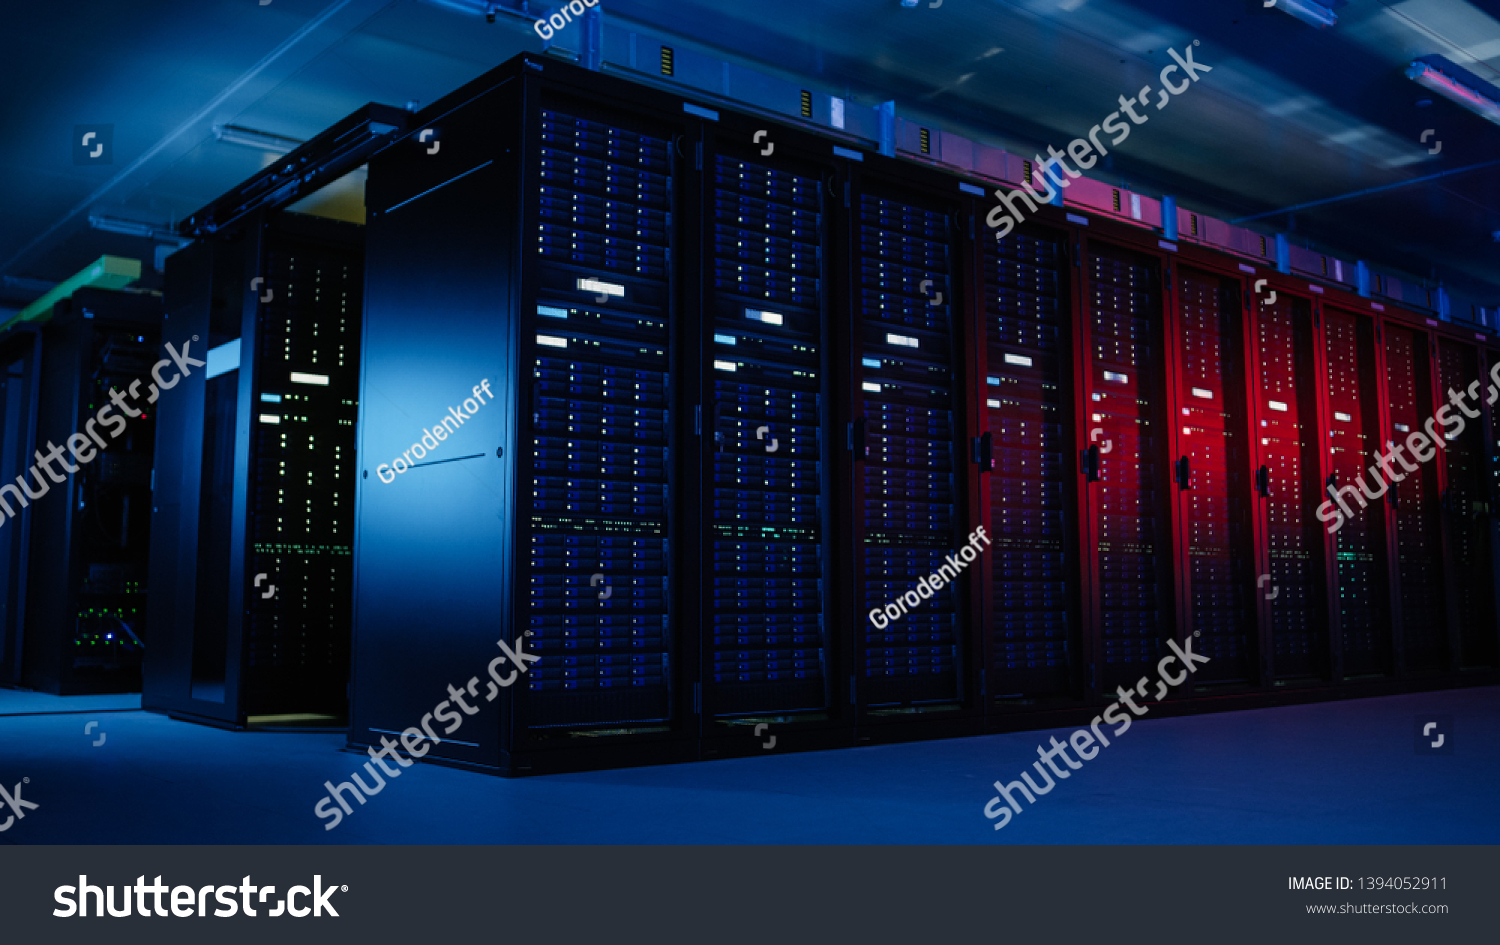 Shot of Data Center With Multiple Rows of Fully Operational Server Racks. Modern Telecommunications, Artificial Intelligence, Supercomputer Technology Concept. Shot in Dark with Neon Blue, Pink Lights #1394052911